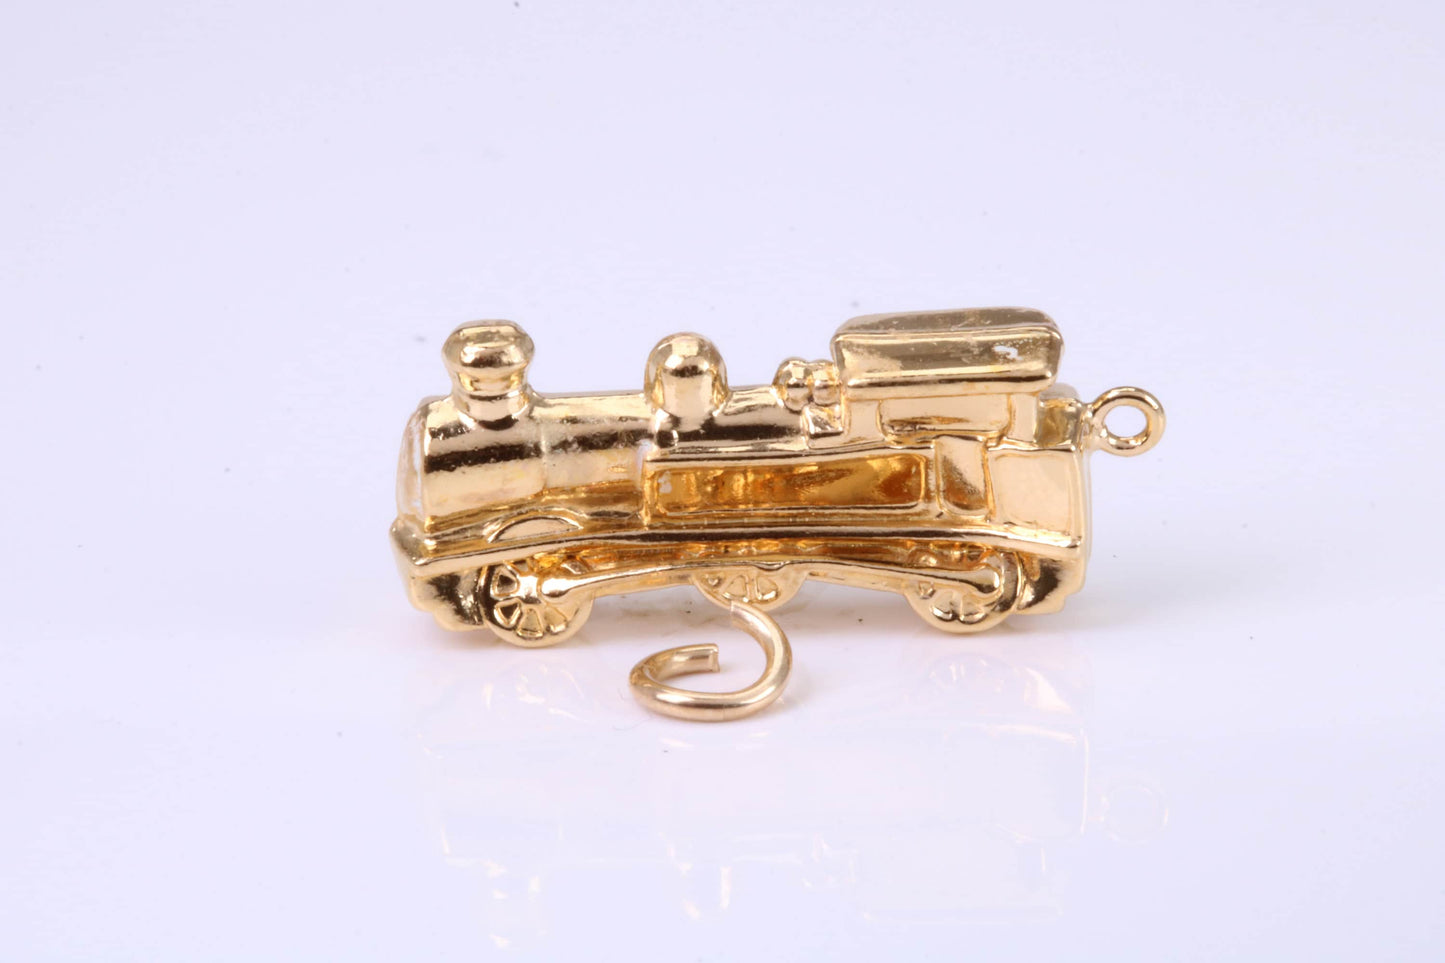 Train Charm, Traditional Charm, Made from Solid Yellow Gold, British Hallmarked, Complete with Attachment Link